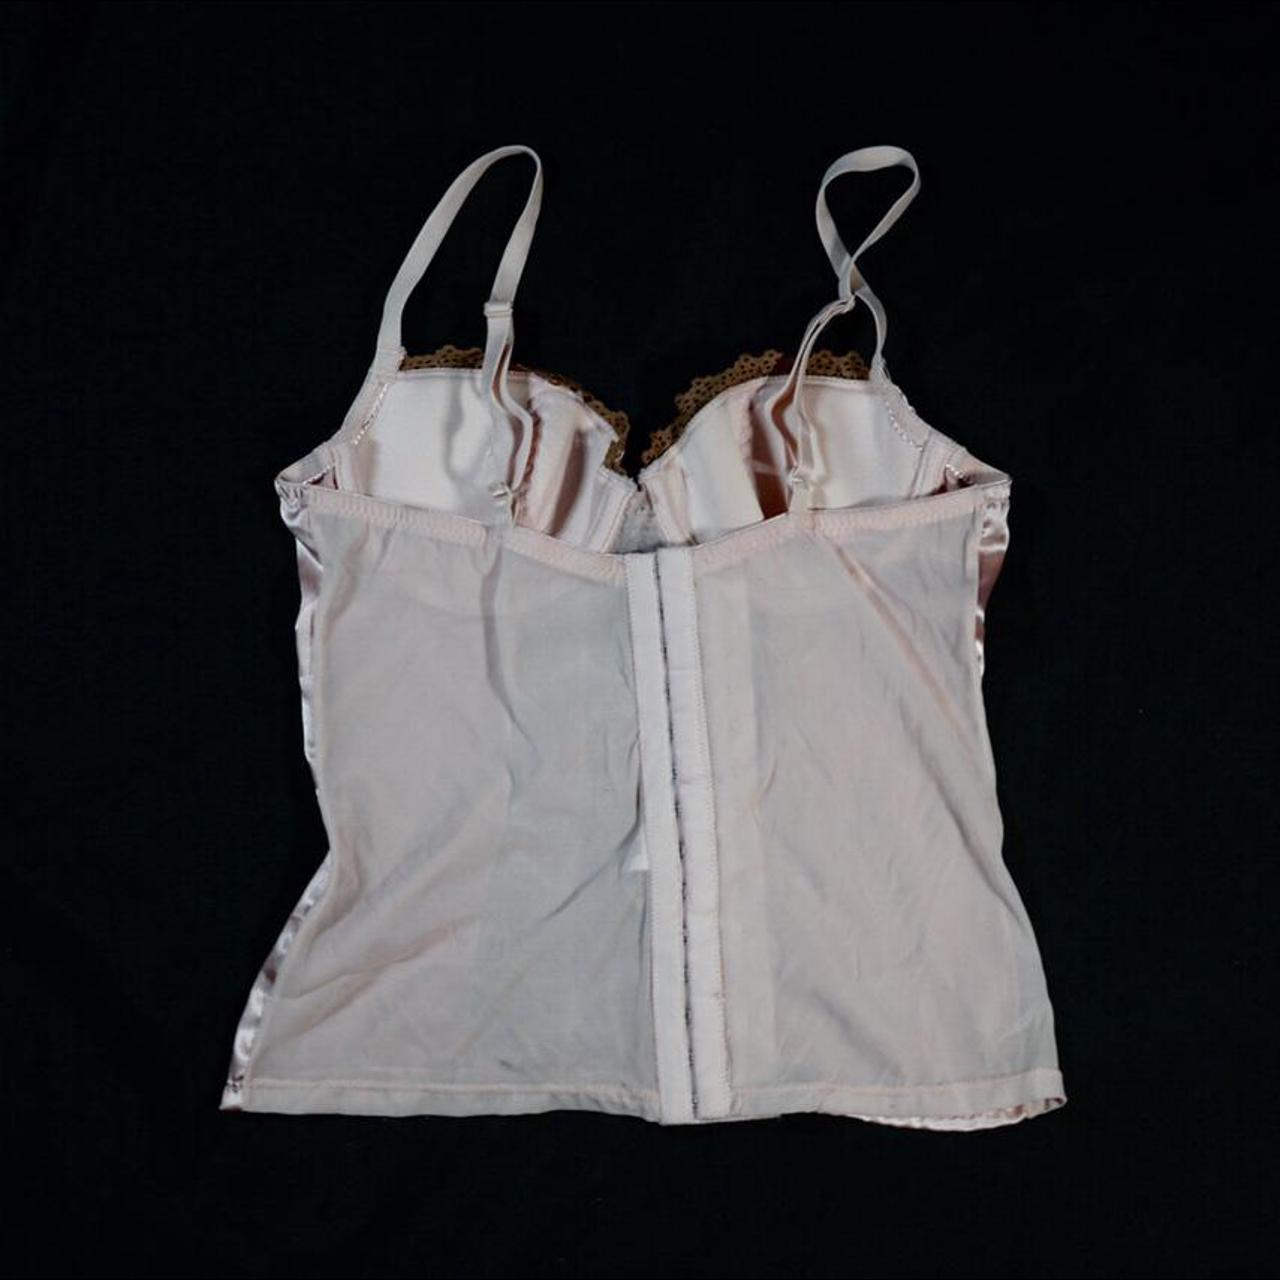 Product Image 2 - Rampage corset top only worn